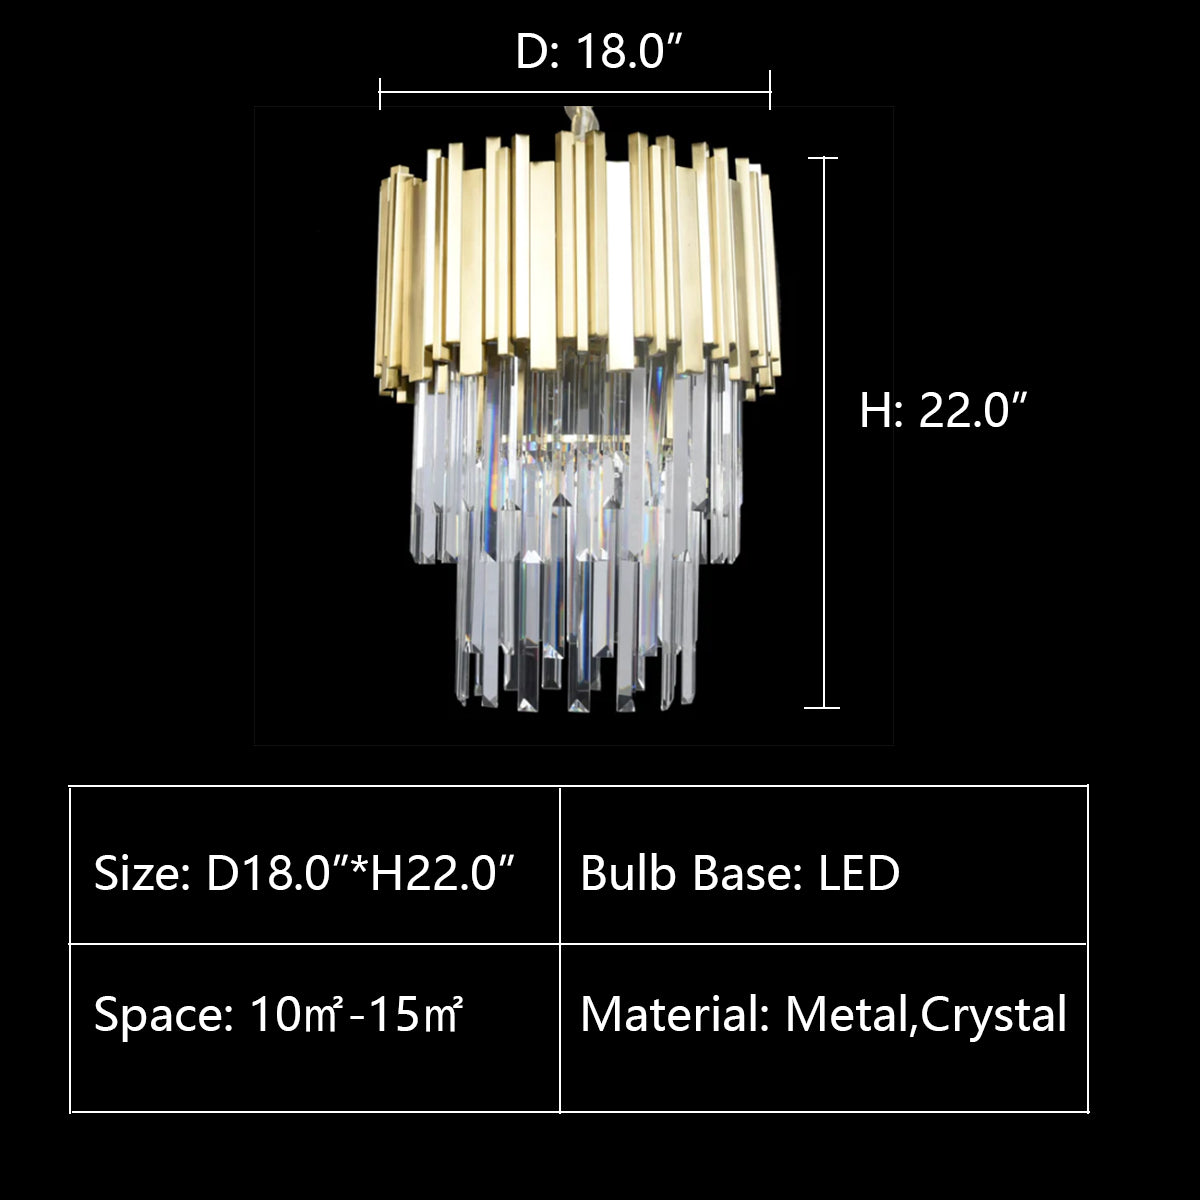 D18.0"*H22.0" Colonnade Tiered Round Crystal Chandelier,chandelier,chandeliers,round,cystal,metal.gold,brass,copper,tiers,layered,tiered,pendant,ceiling,light luxury,kitchen island,dining table,dining room,living room,bedroom,bar